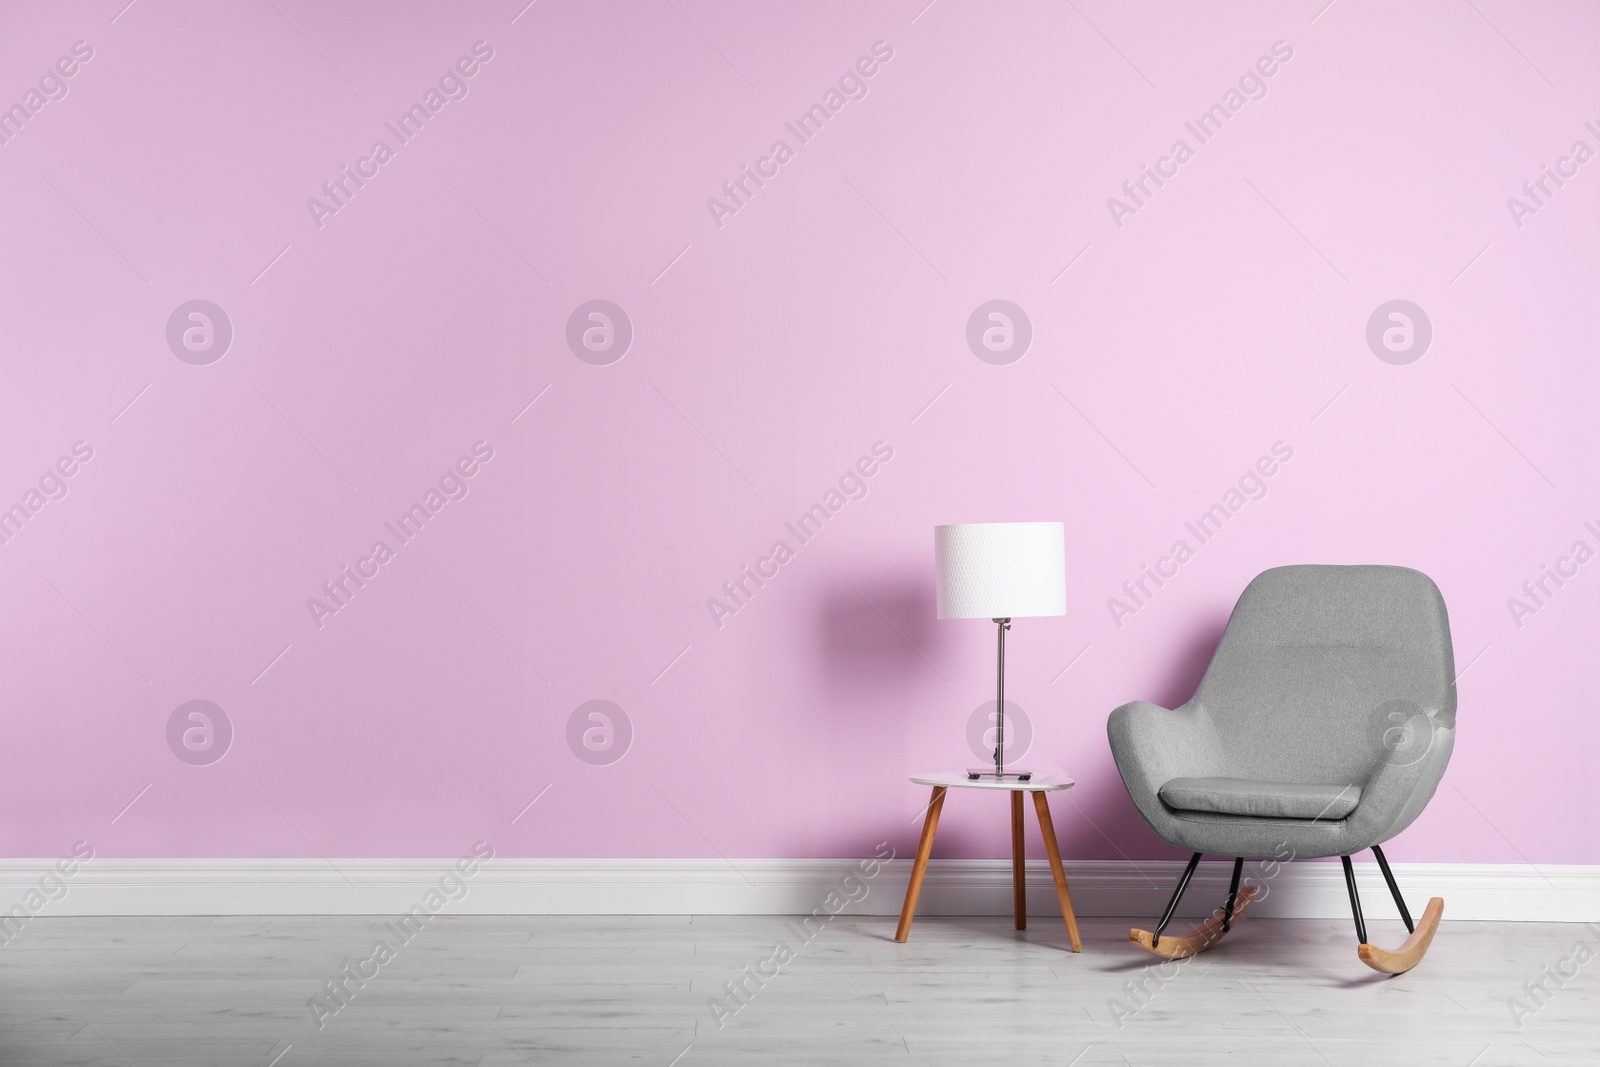 Photo of Rocking chair and lamp on table near color wall with space for text. Interior element